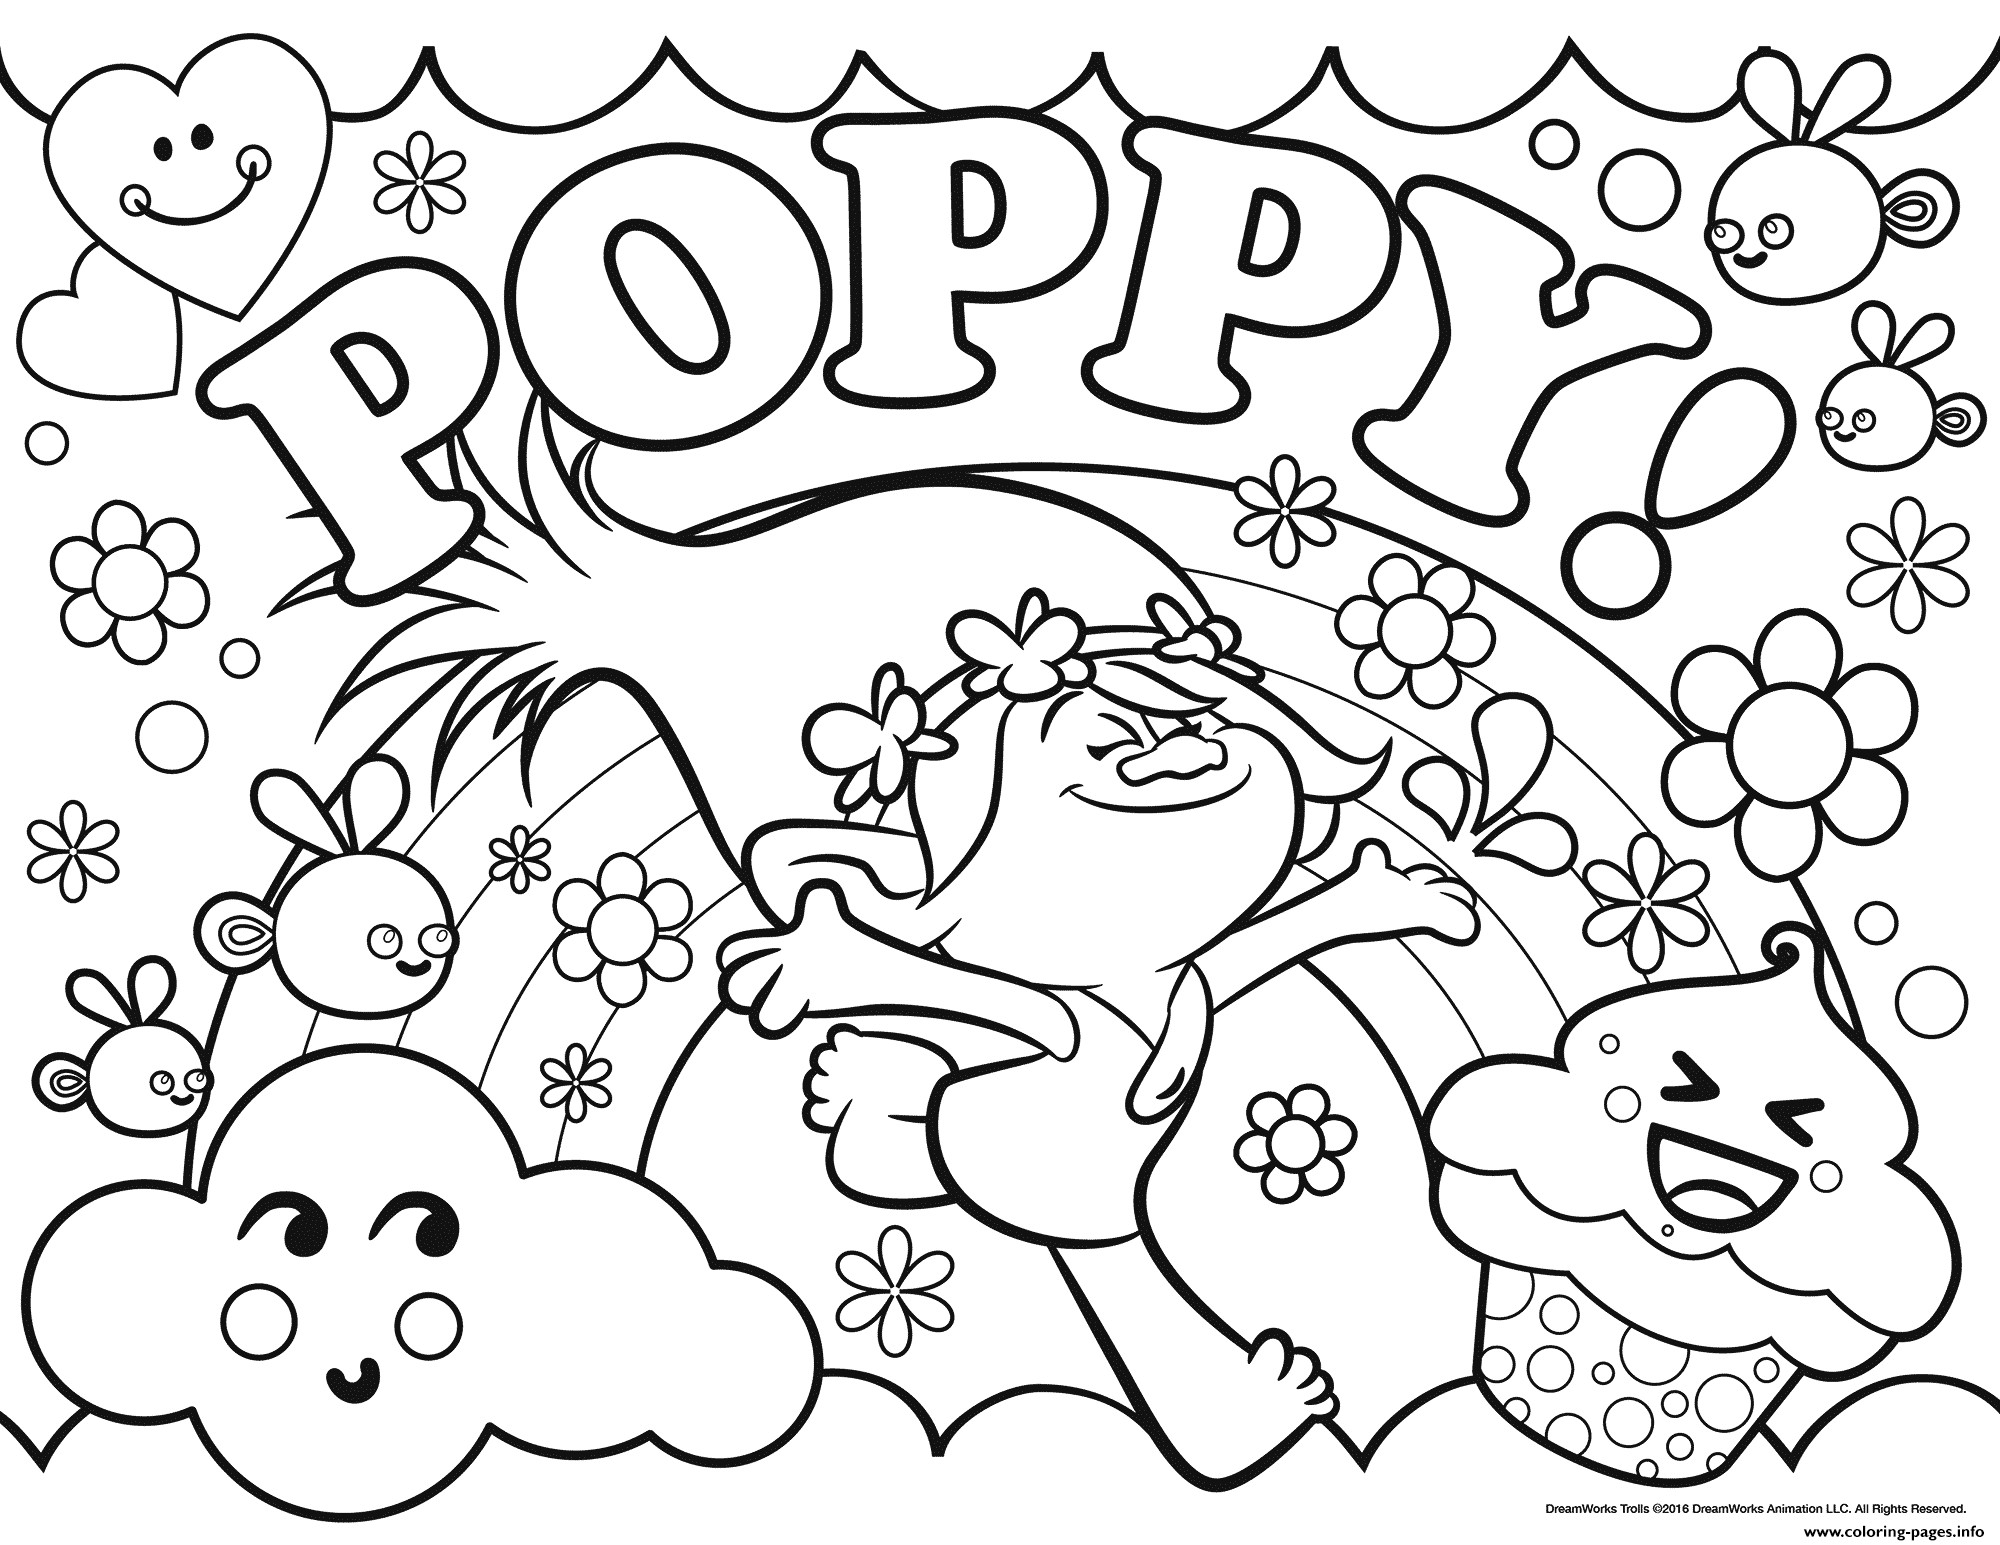 Print Trolls Poppy coloring pages